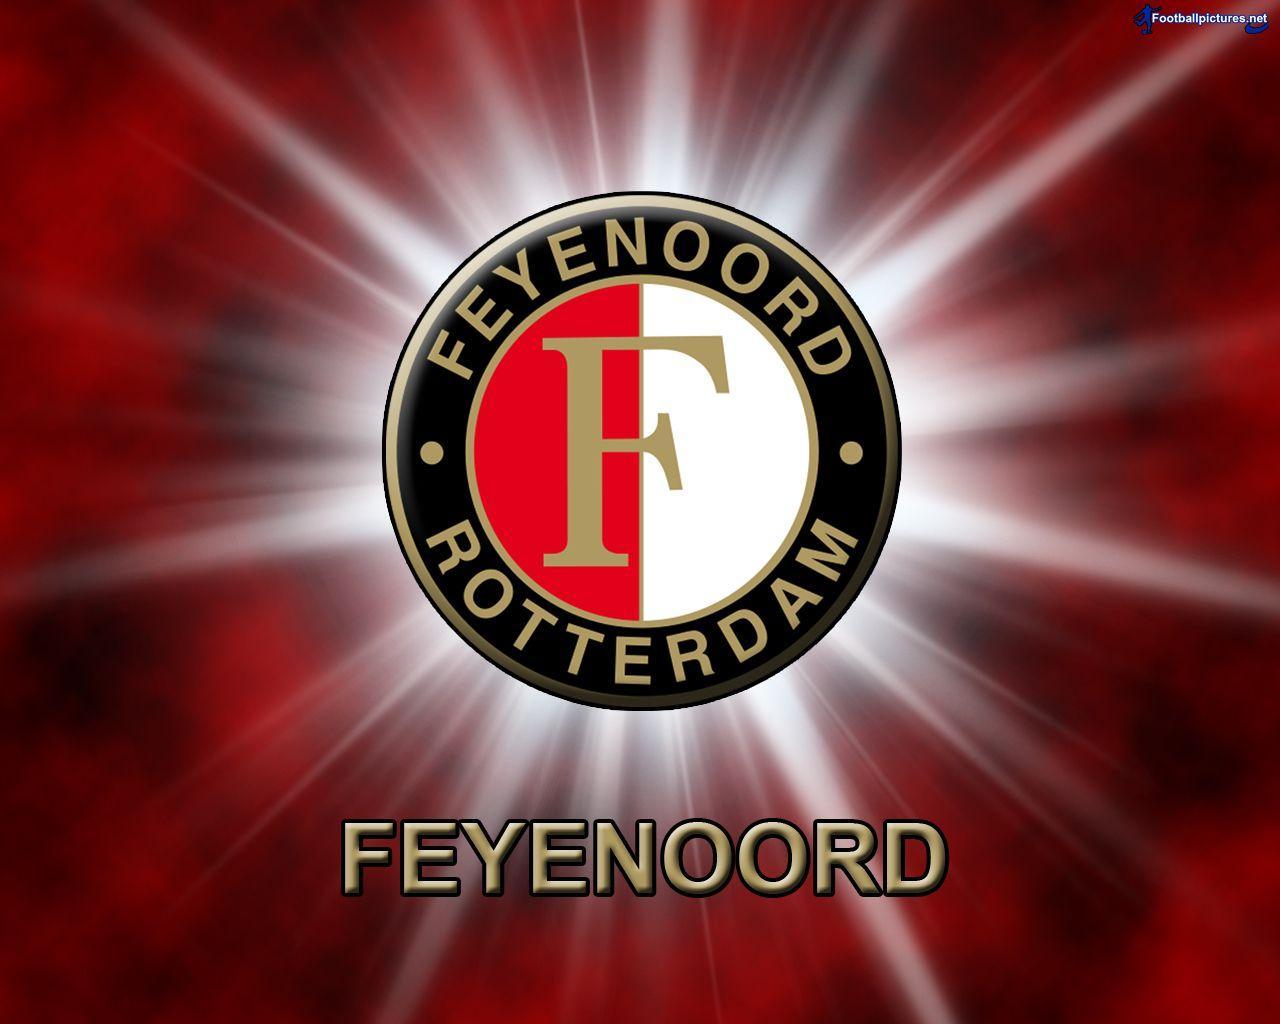 Feyenoord picture, Football Wallpaper and Photo